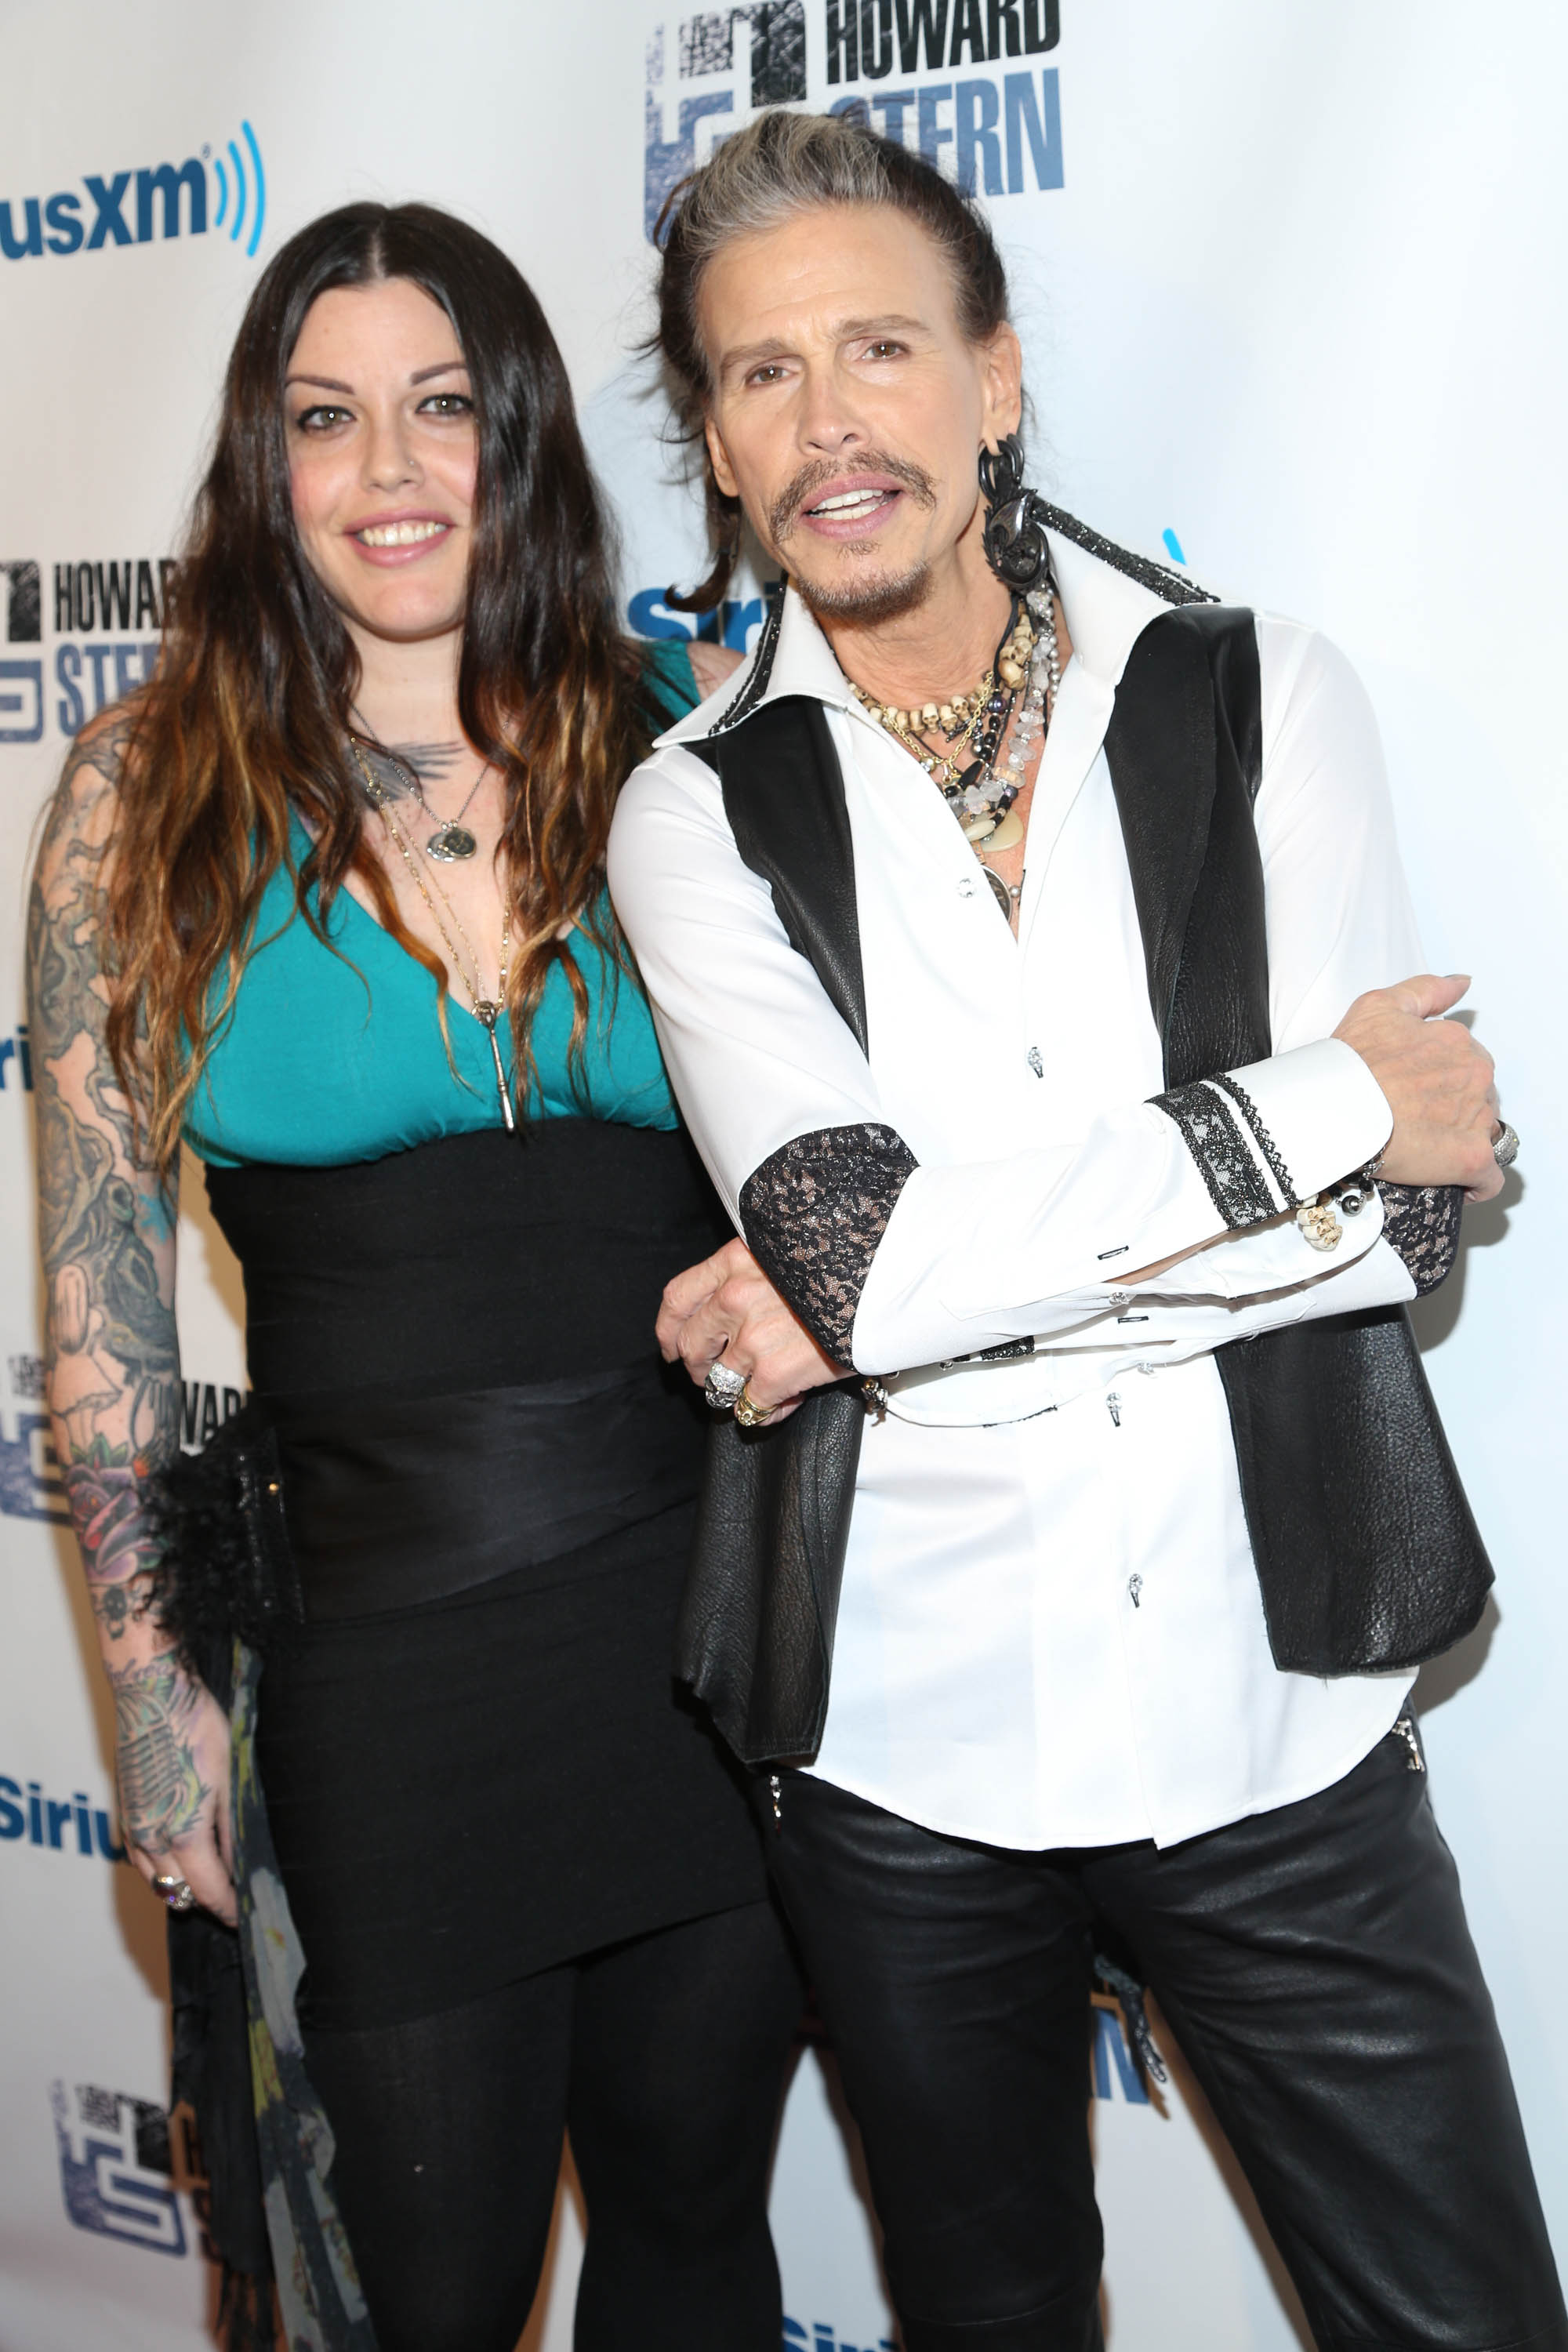 Steven Tyler Confirms His Daughter Mia Tyler is Pregnant - Closer Weekly